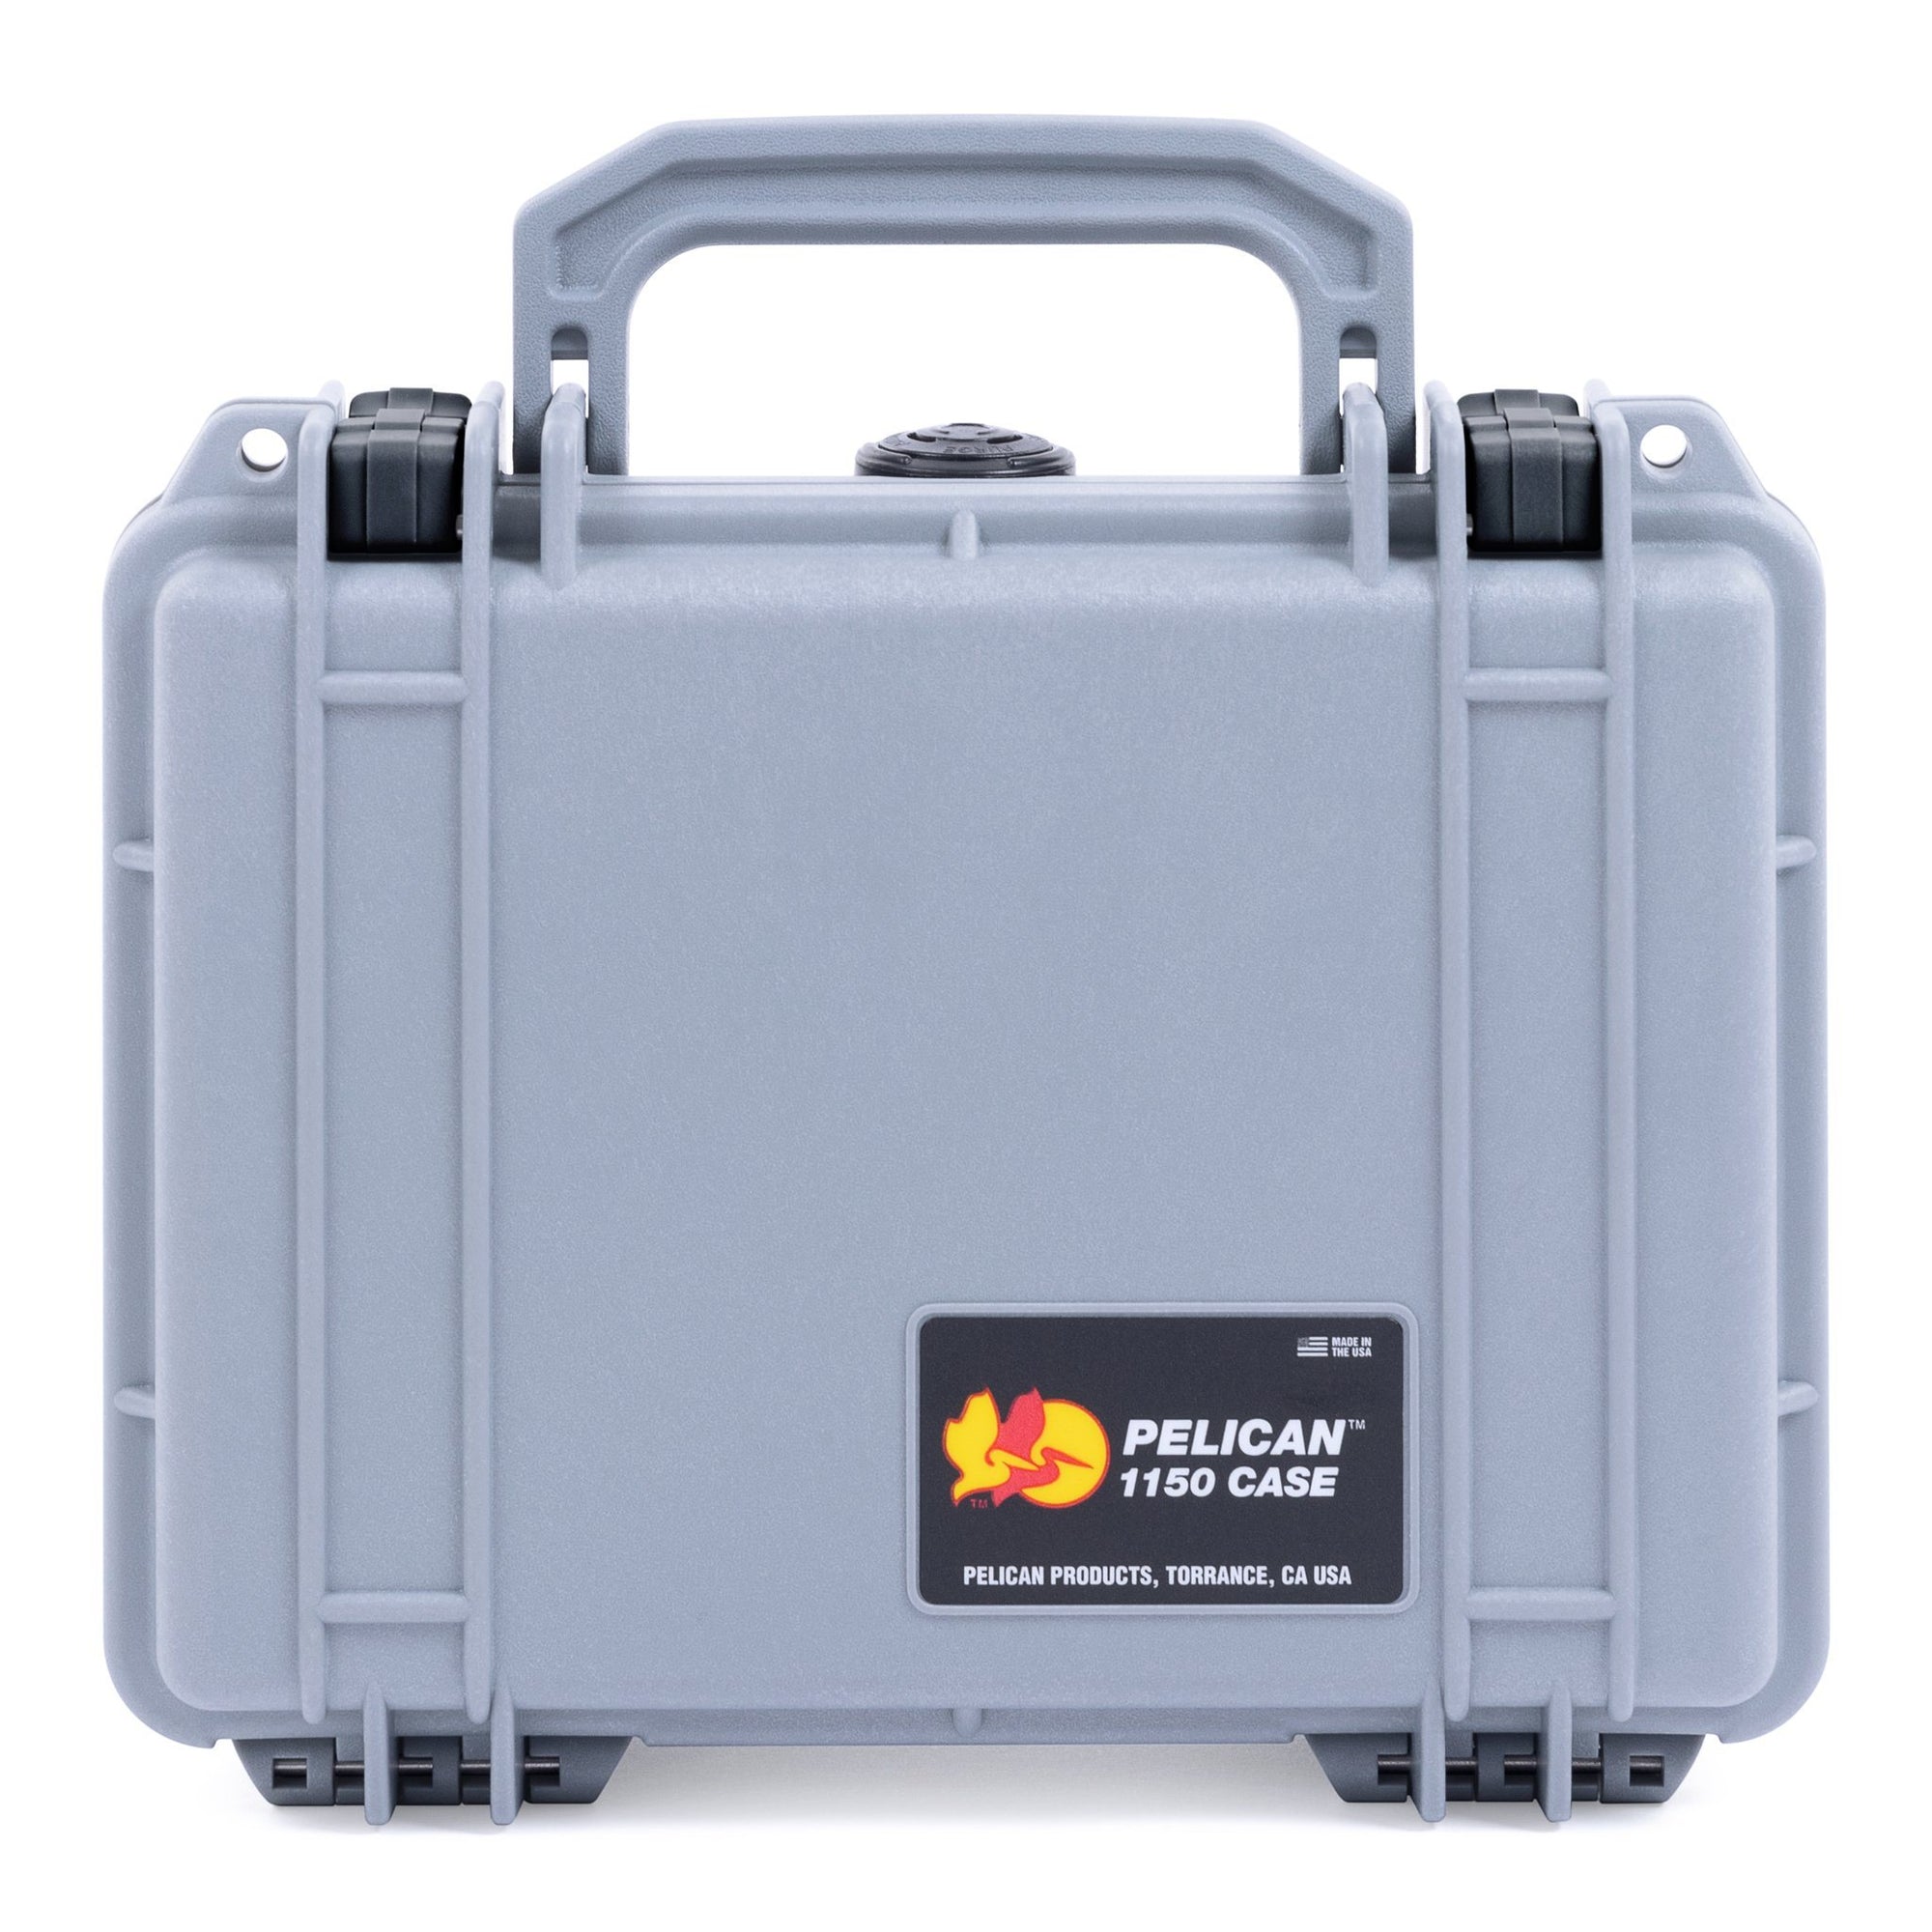 Pelican 1150 Case, Silver with Black Latches ColorCase 